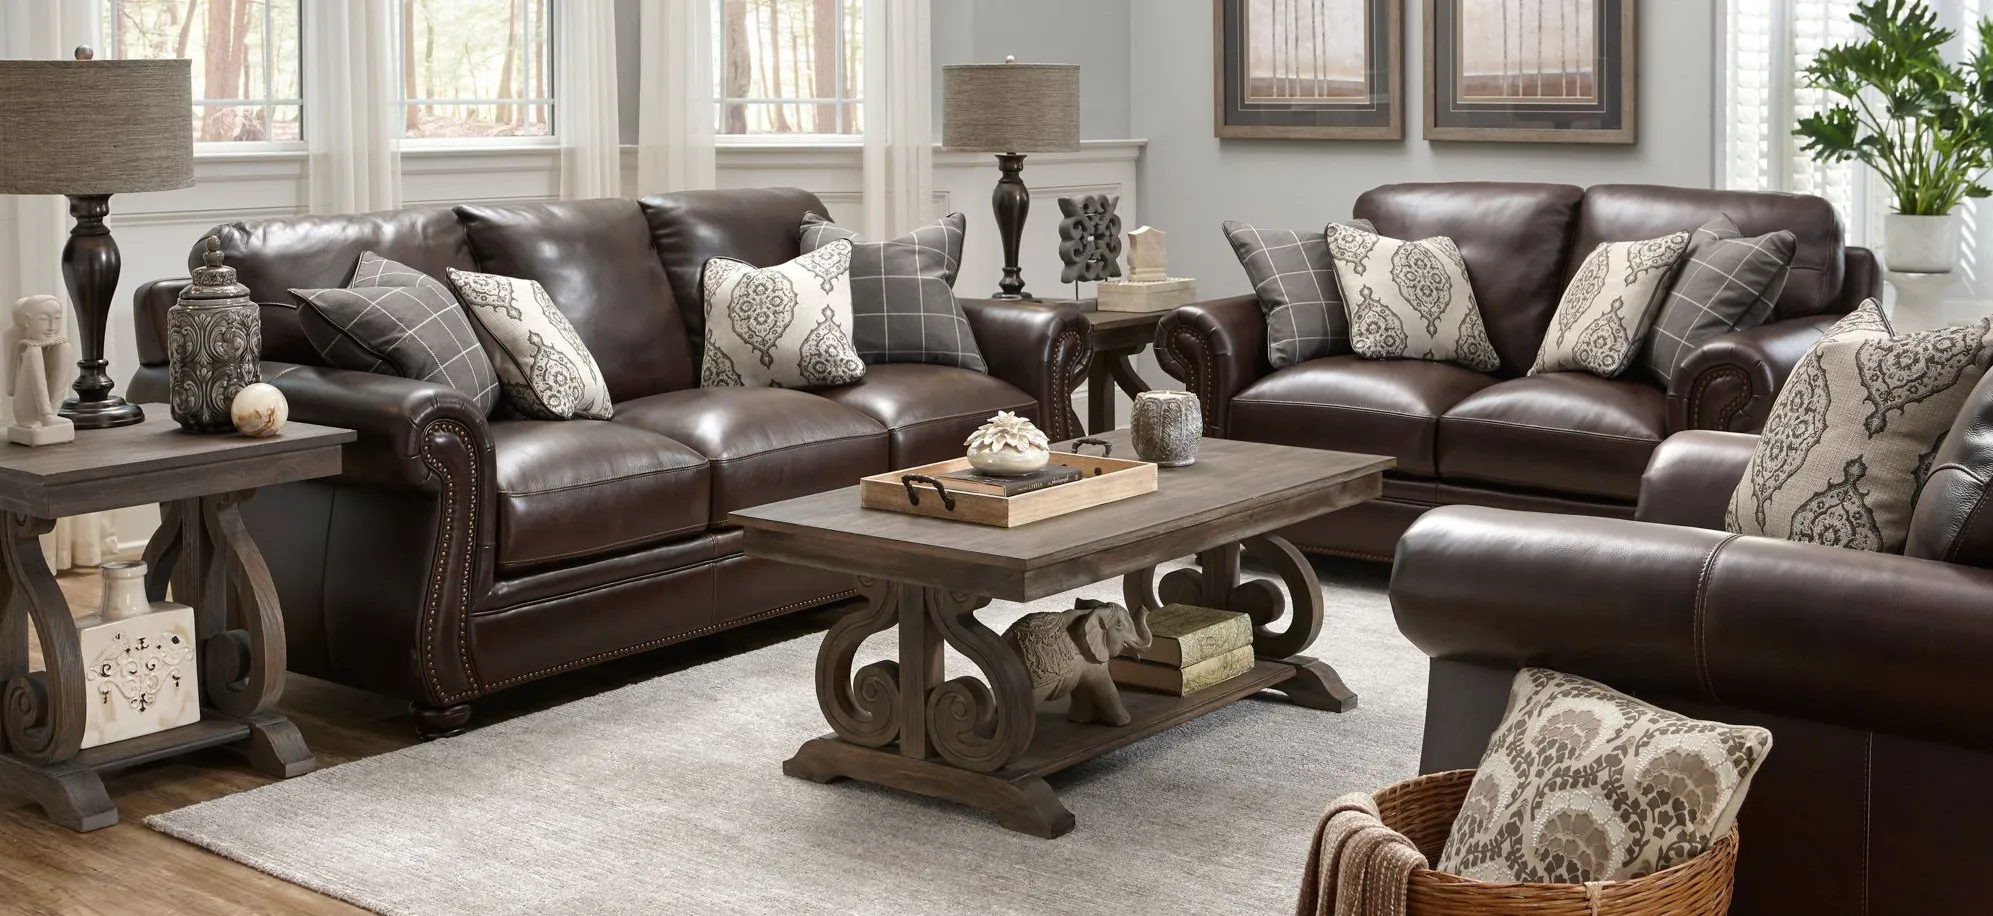 Alistair 2-pc.. Leather Sofa and Loveseat Set in Brown by Bellanest